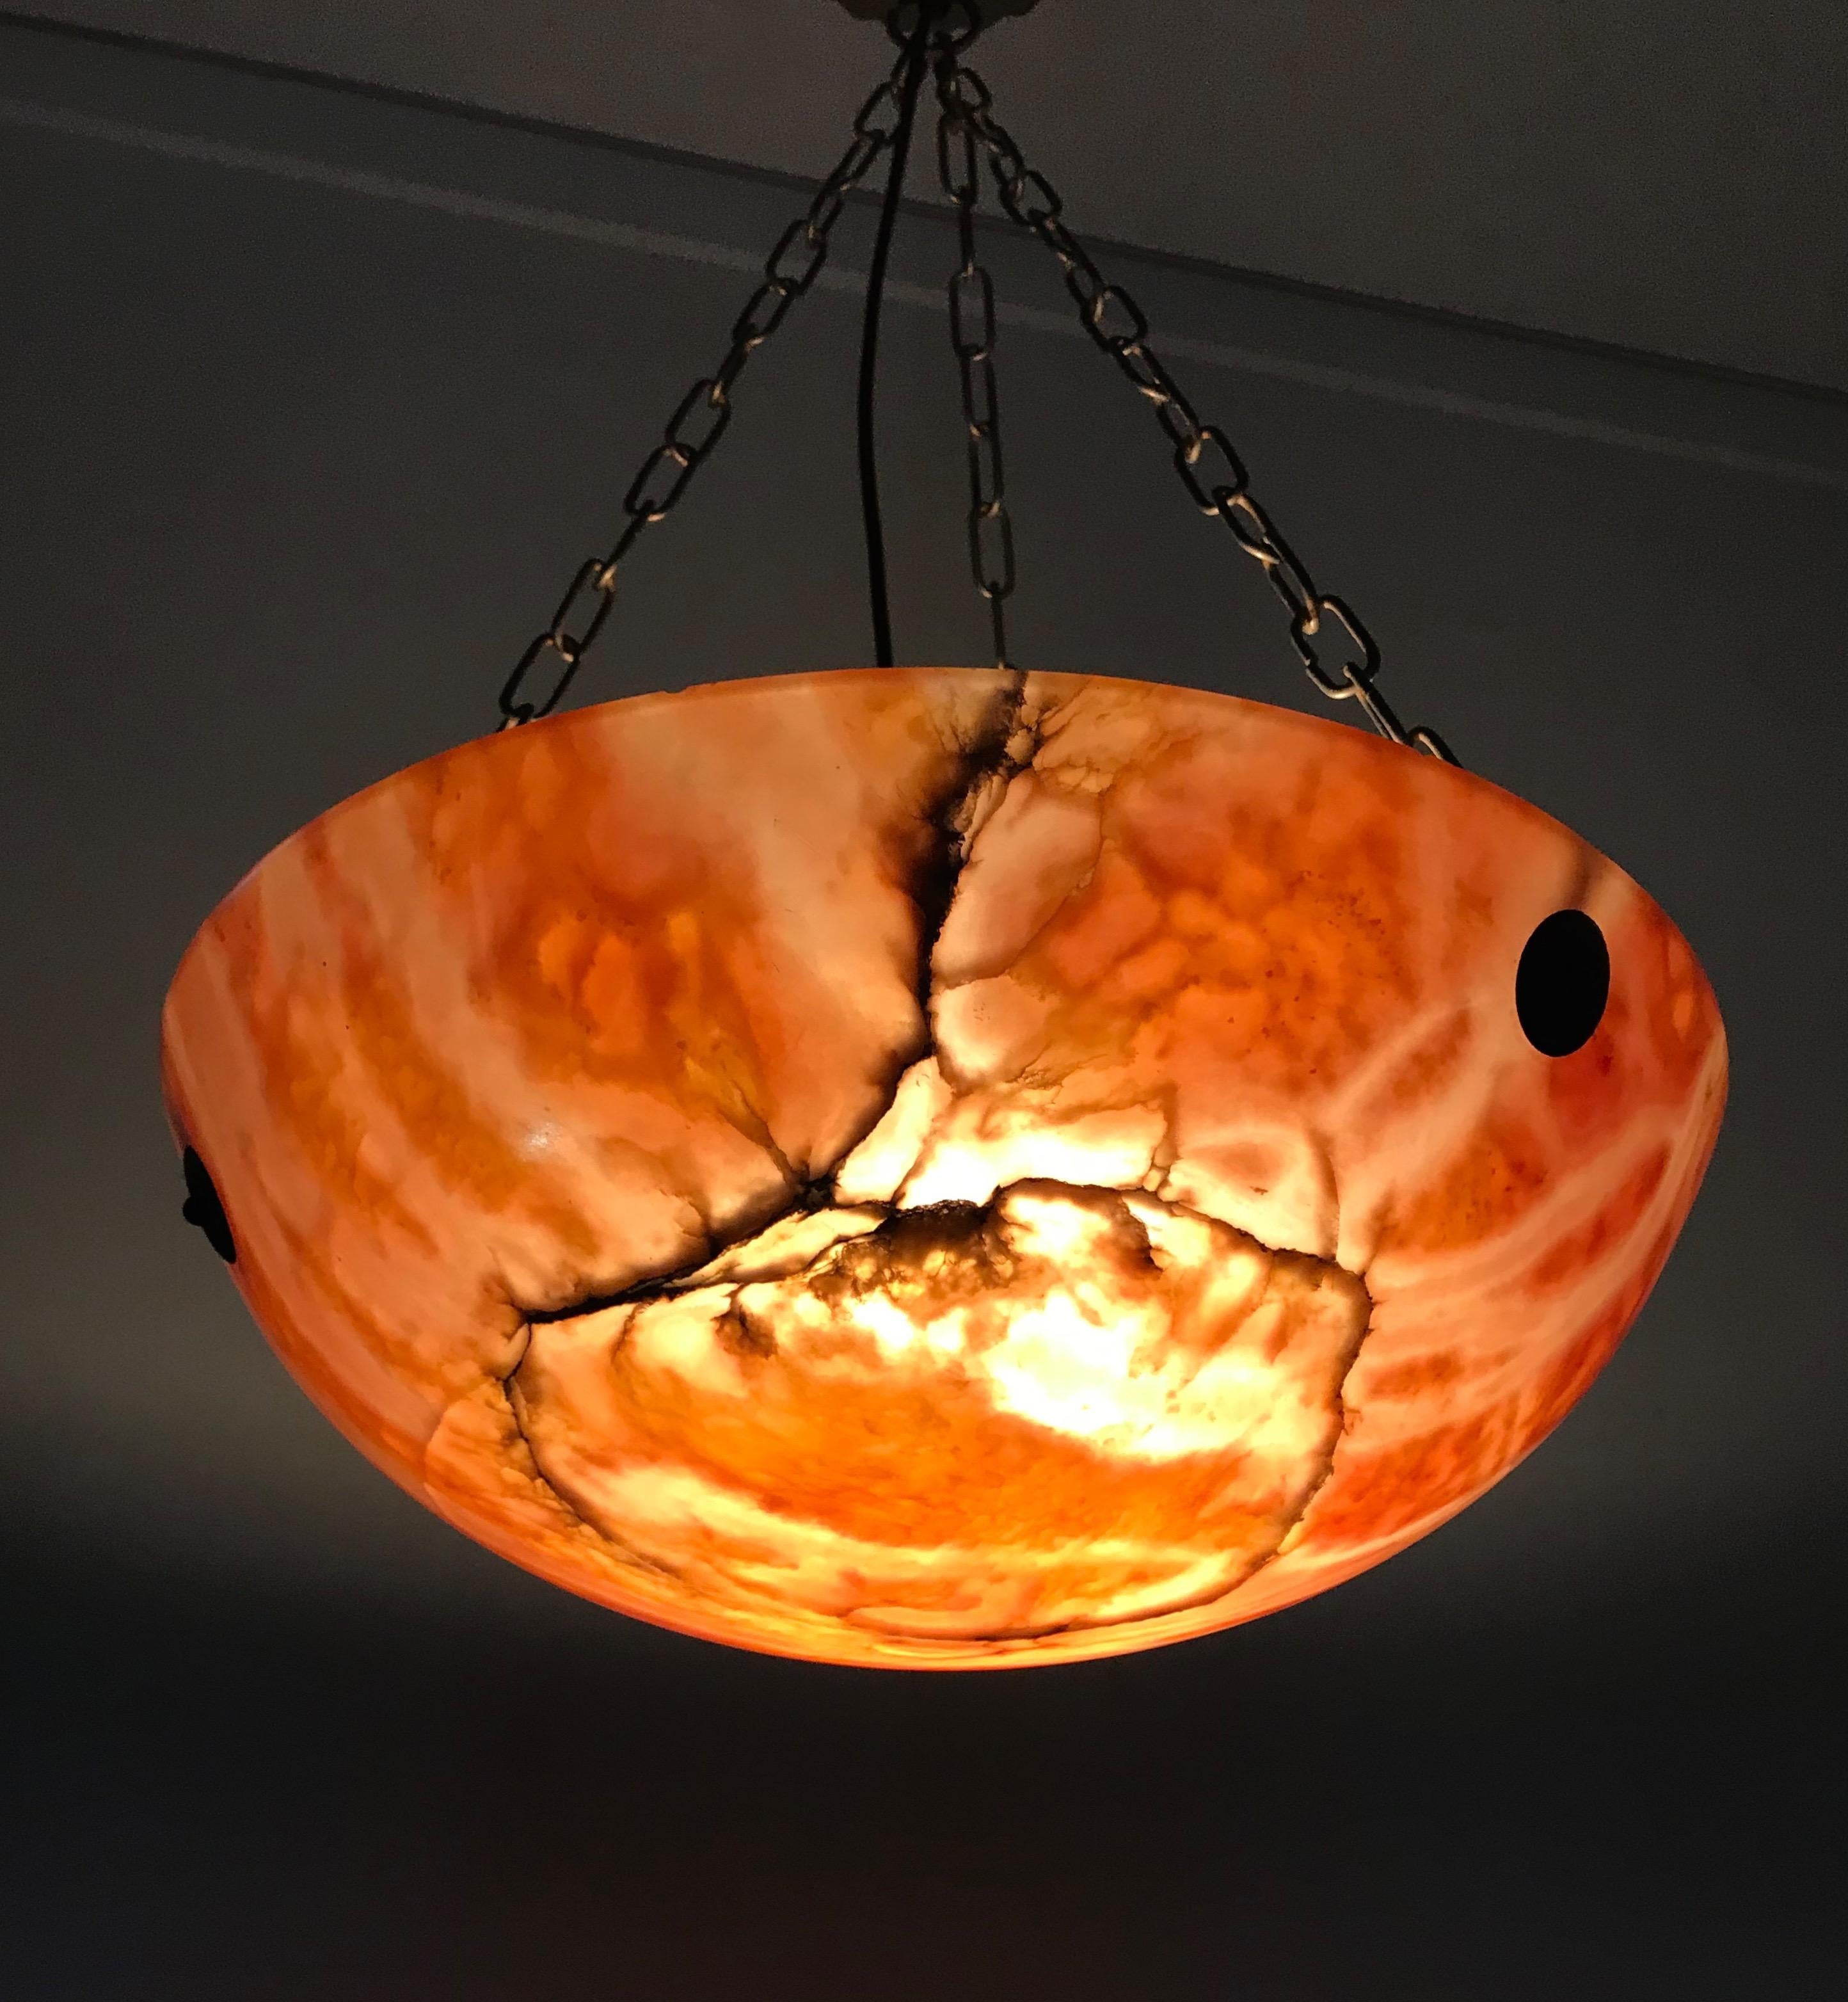 Good condition, Italian Antique. 1920s pendant light.

If you like the Art Deco style in general and Art Deco chandeliers in particular, then this alabaster shade and iron chains light fixture could be perfect for you. Both with the light switched